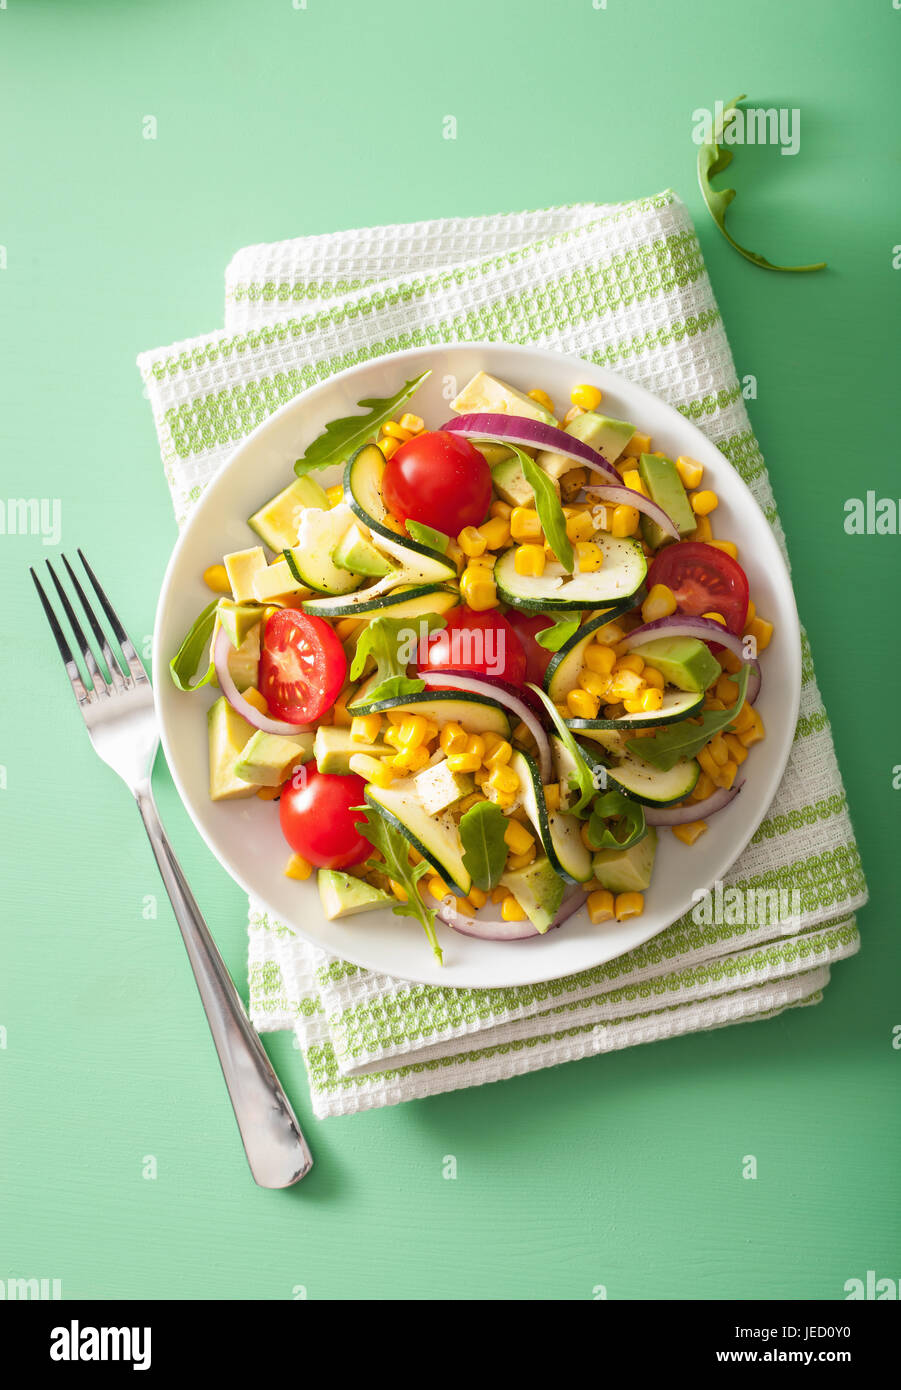 spiralized courgette salad with sweetcorn tomato avocado, healthy vegan meal Stock Photo